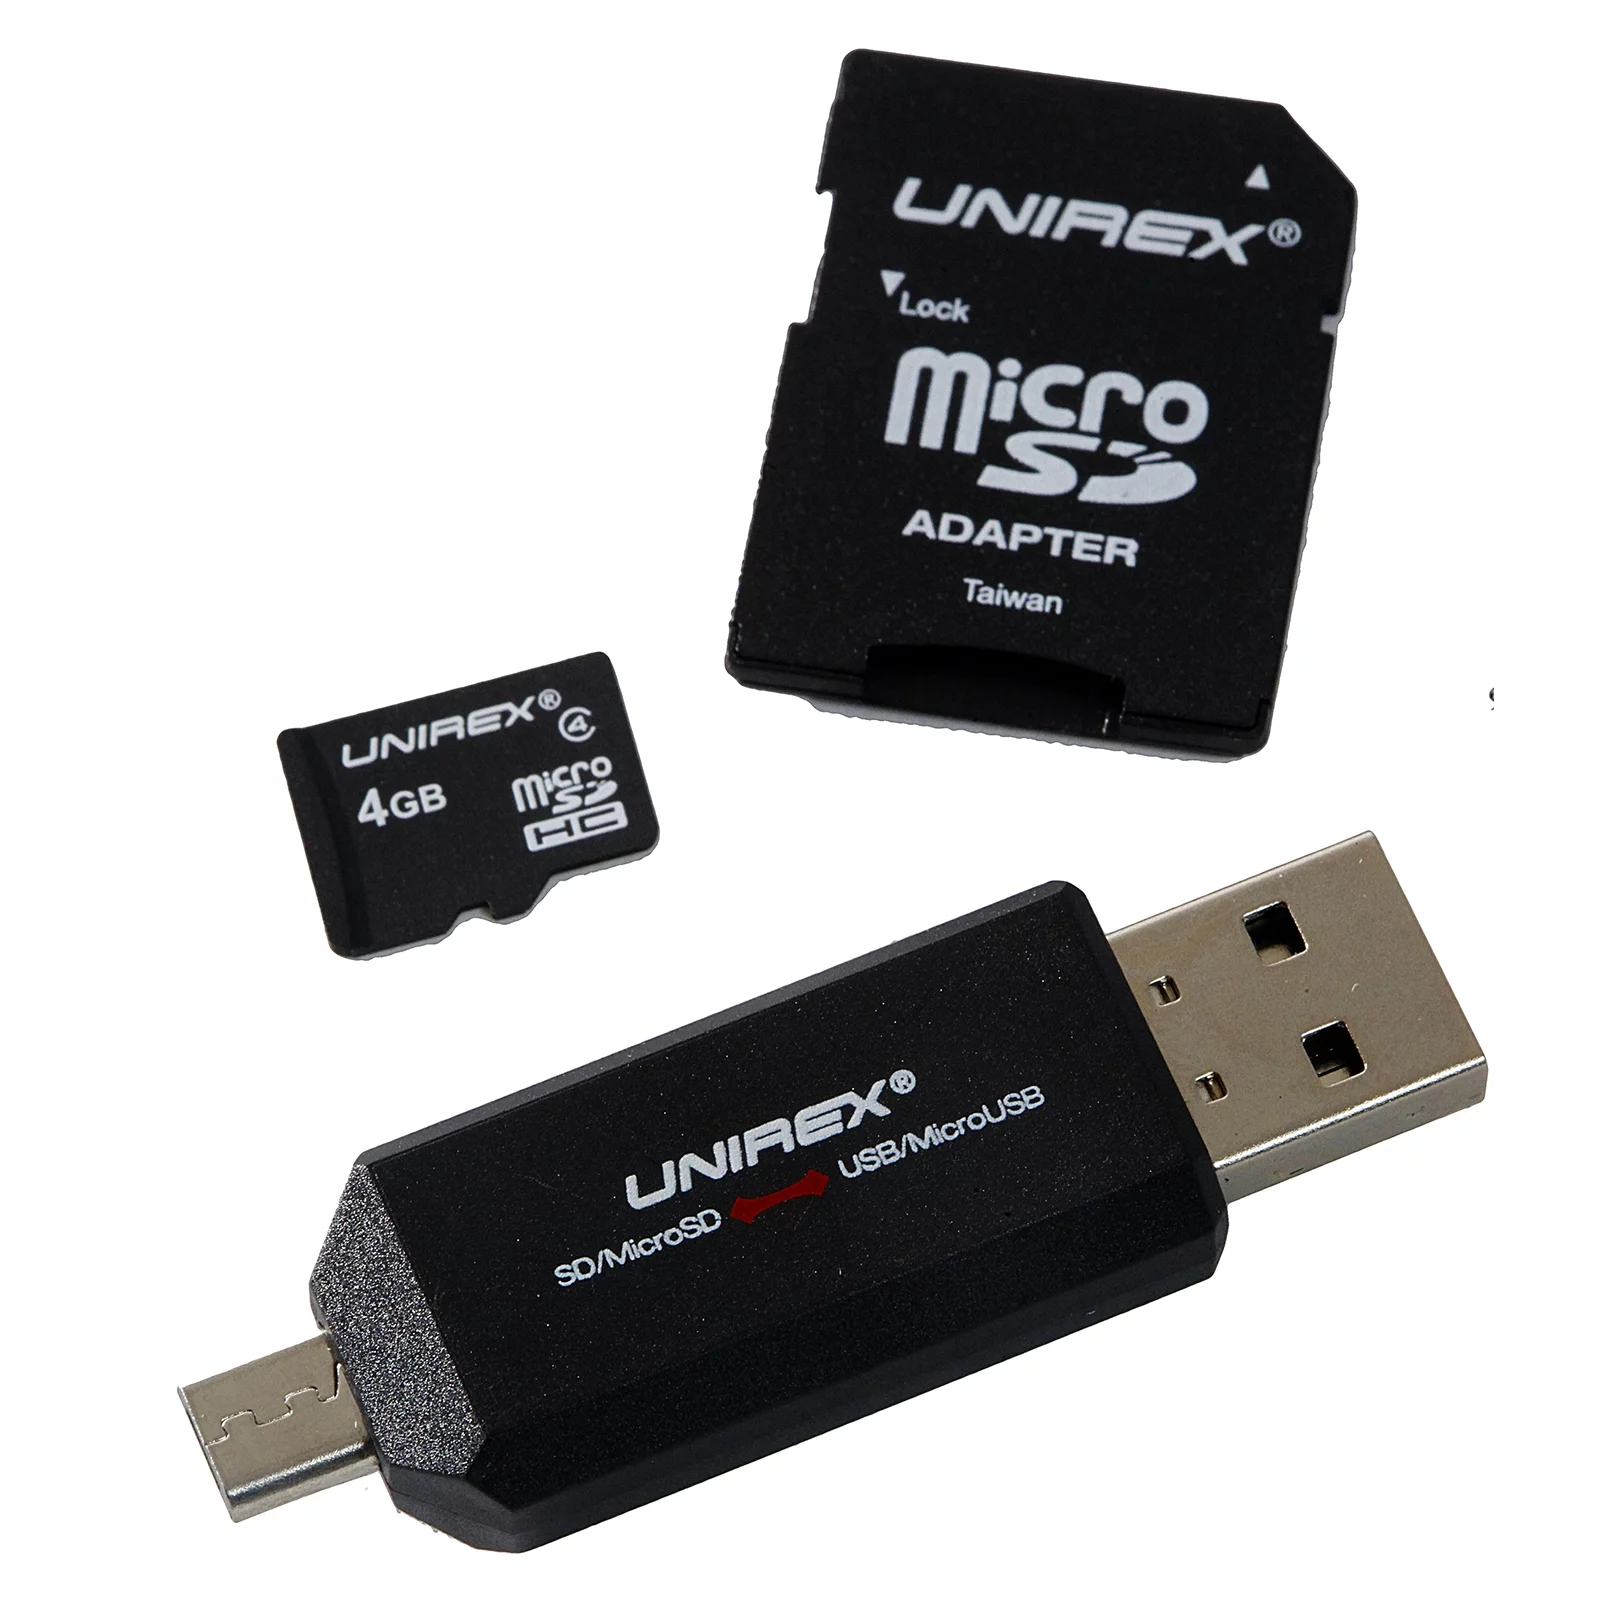 Is there a performance difference between SD MicroSD adaptor vs USB MicroSD  adaptor? - Super User